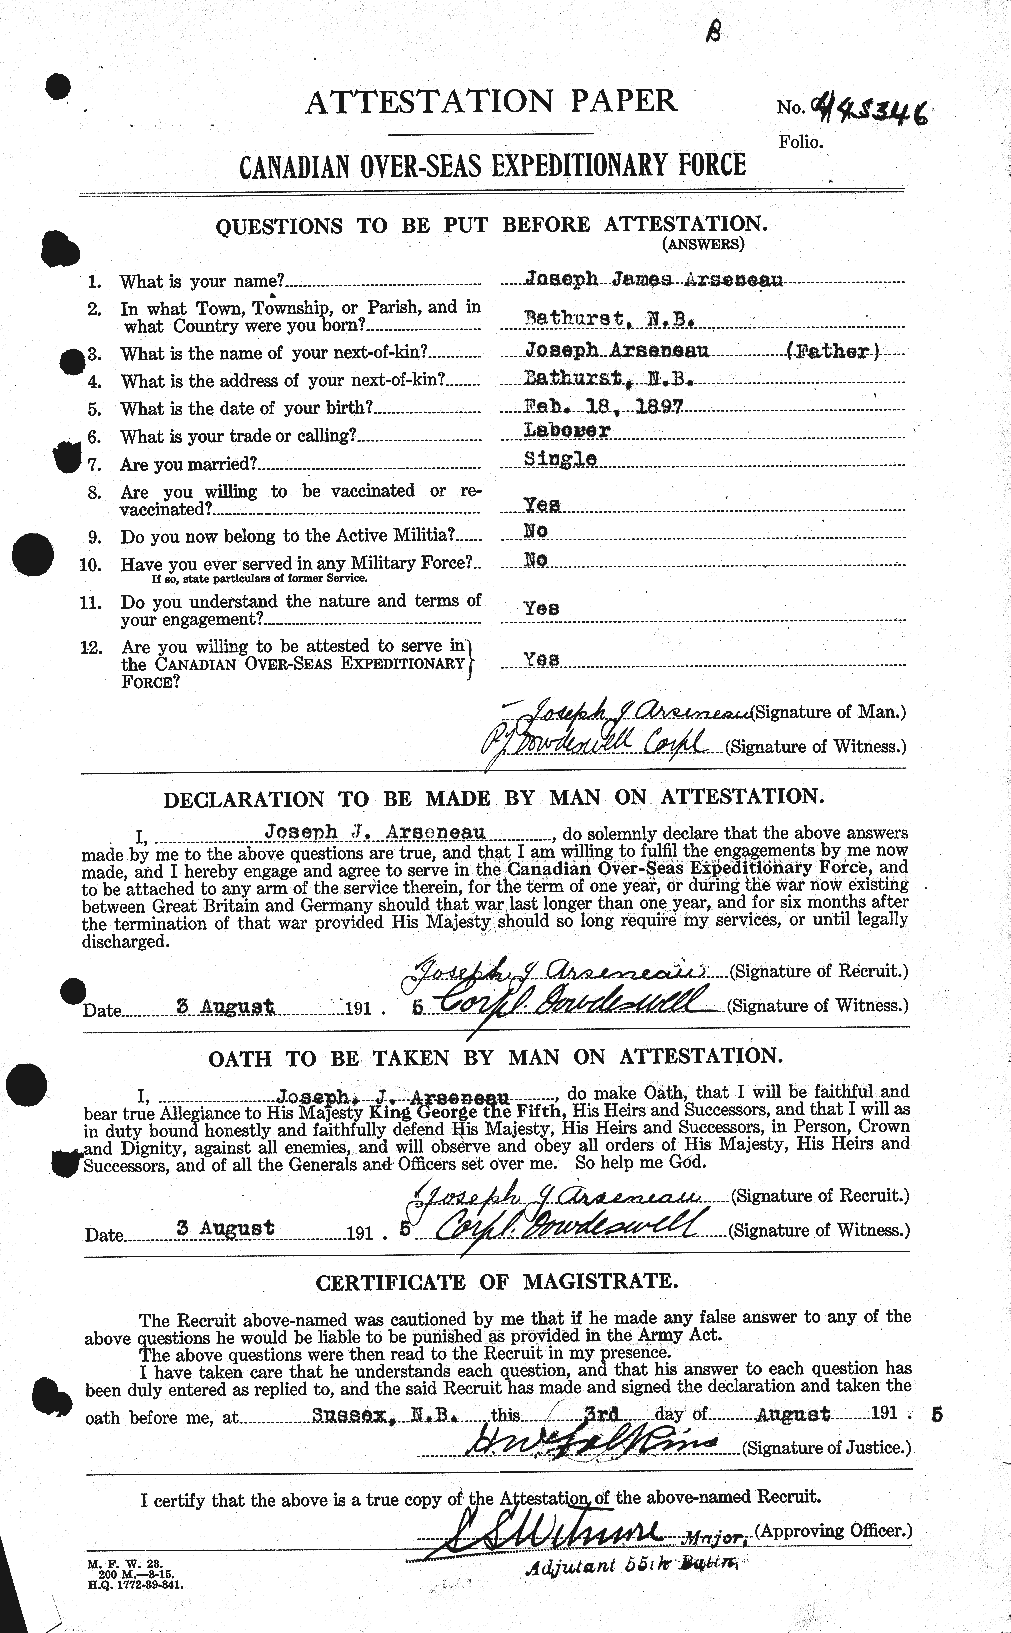 Personnel Records of the First World War - CEF 214950a